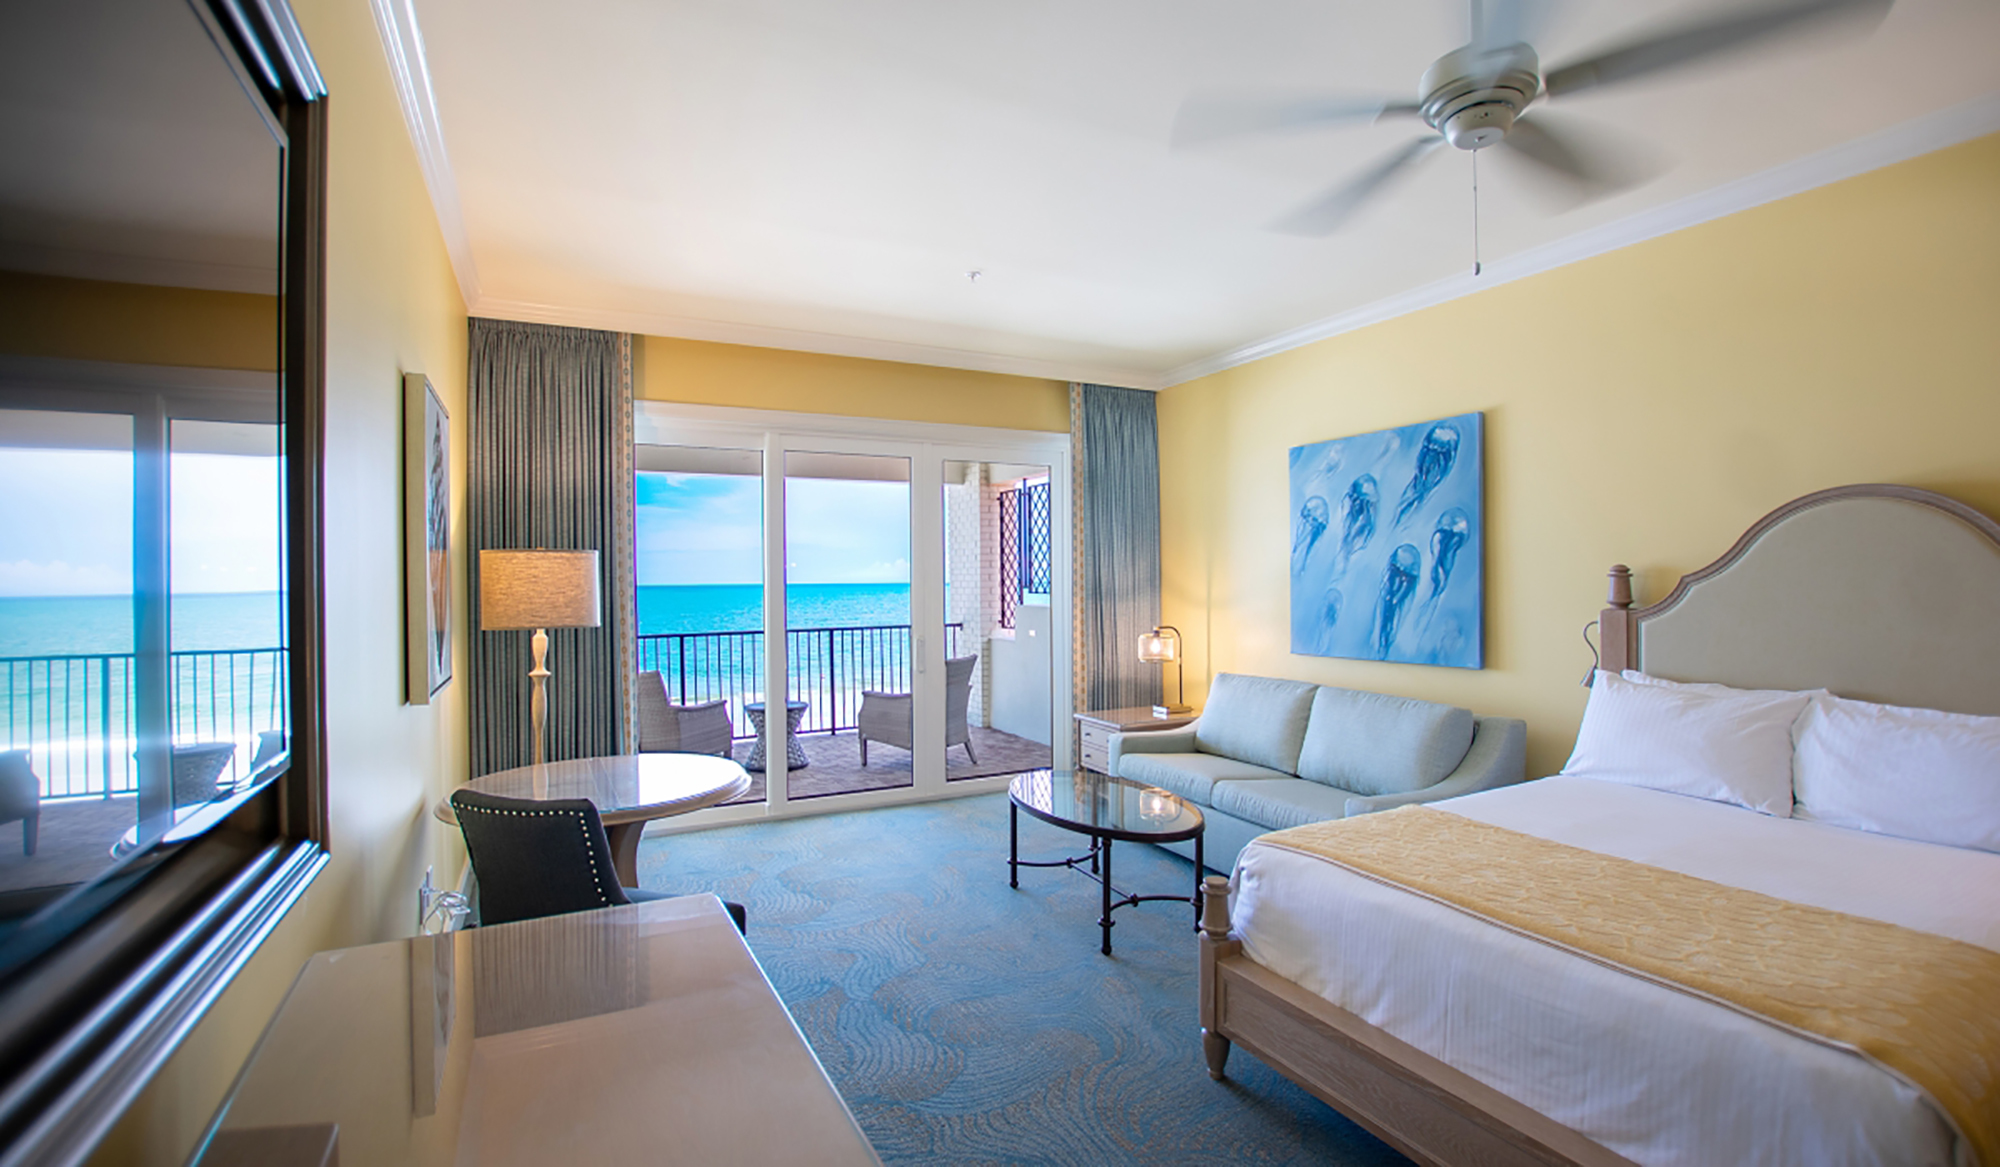 A superior luxury king room available in either Peyton or Ocean House.